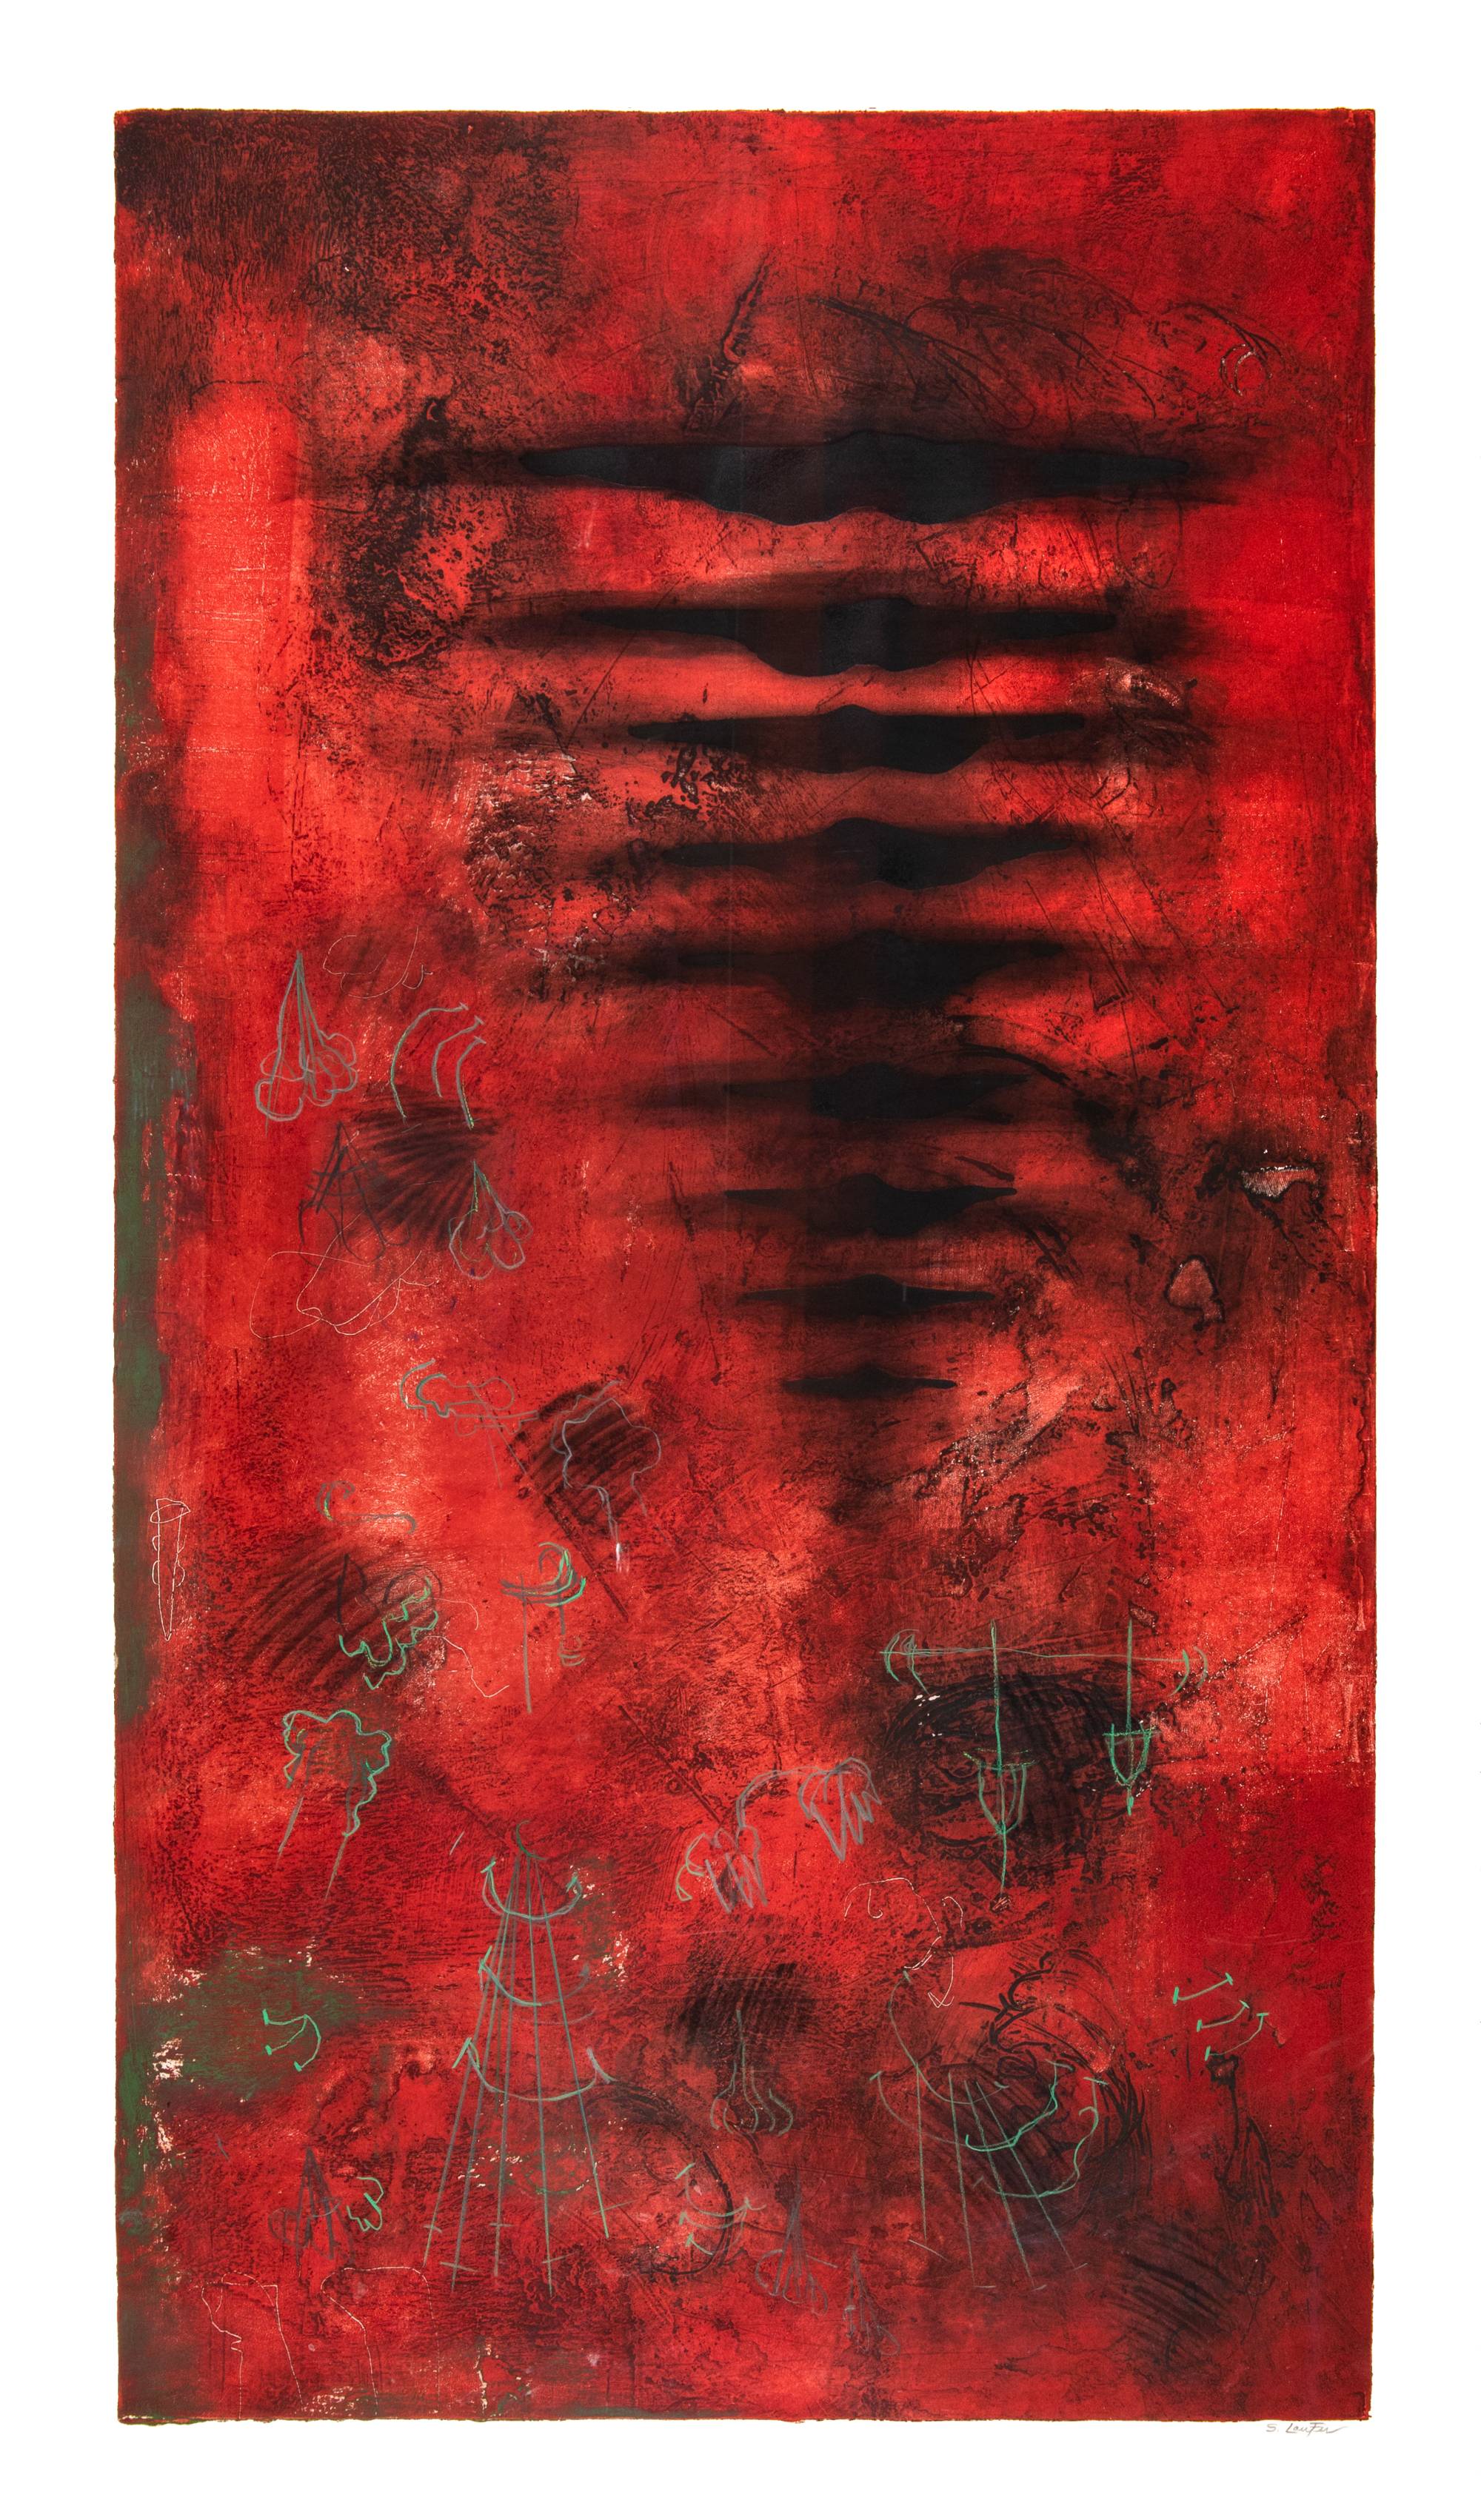 monotype of red and black abstract forms